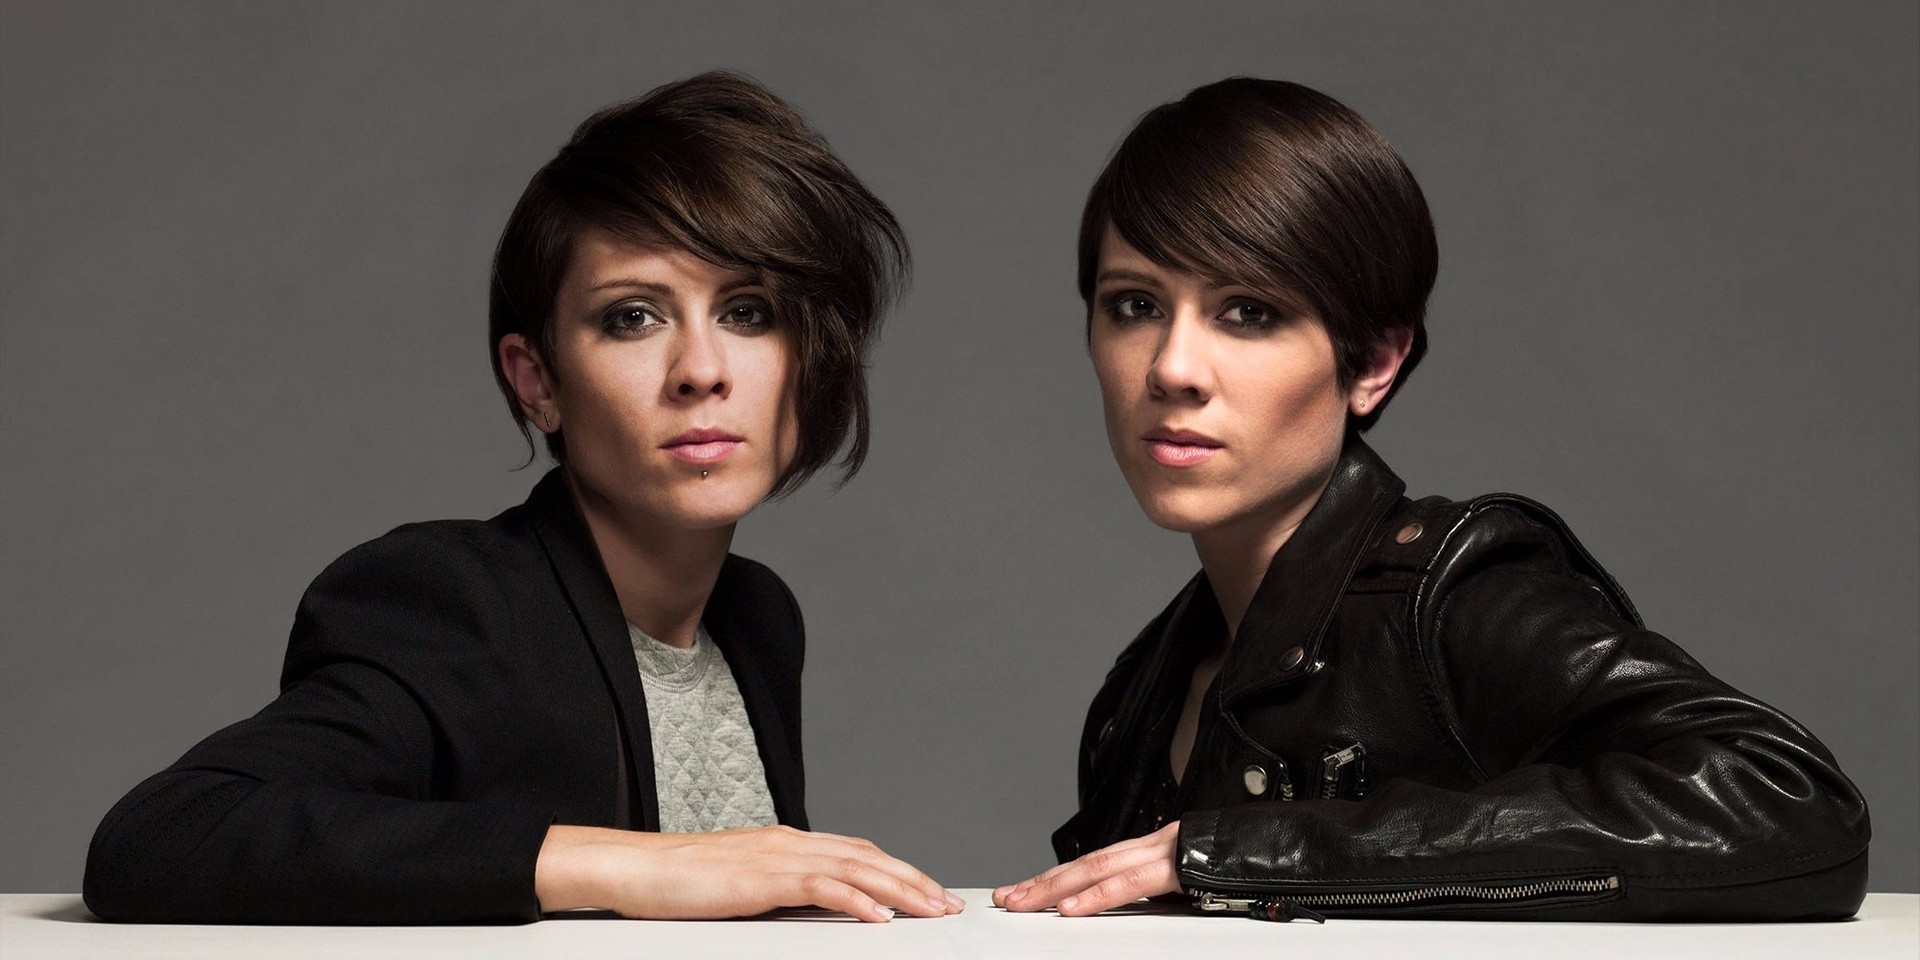 Tegan & Sara's Tegan Quin on reclaiming intelligent pop and understanding "how profoundly immediate everything is"